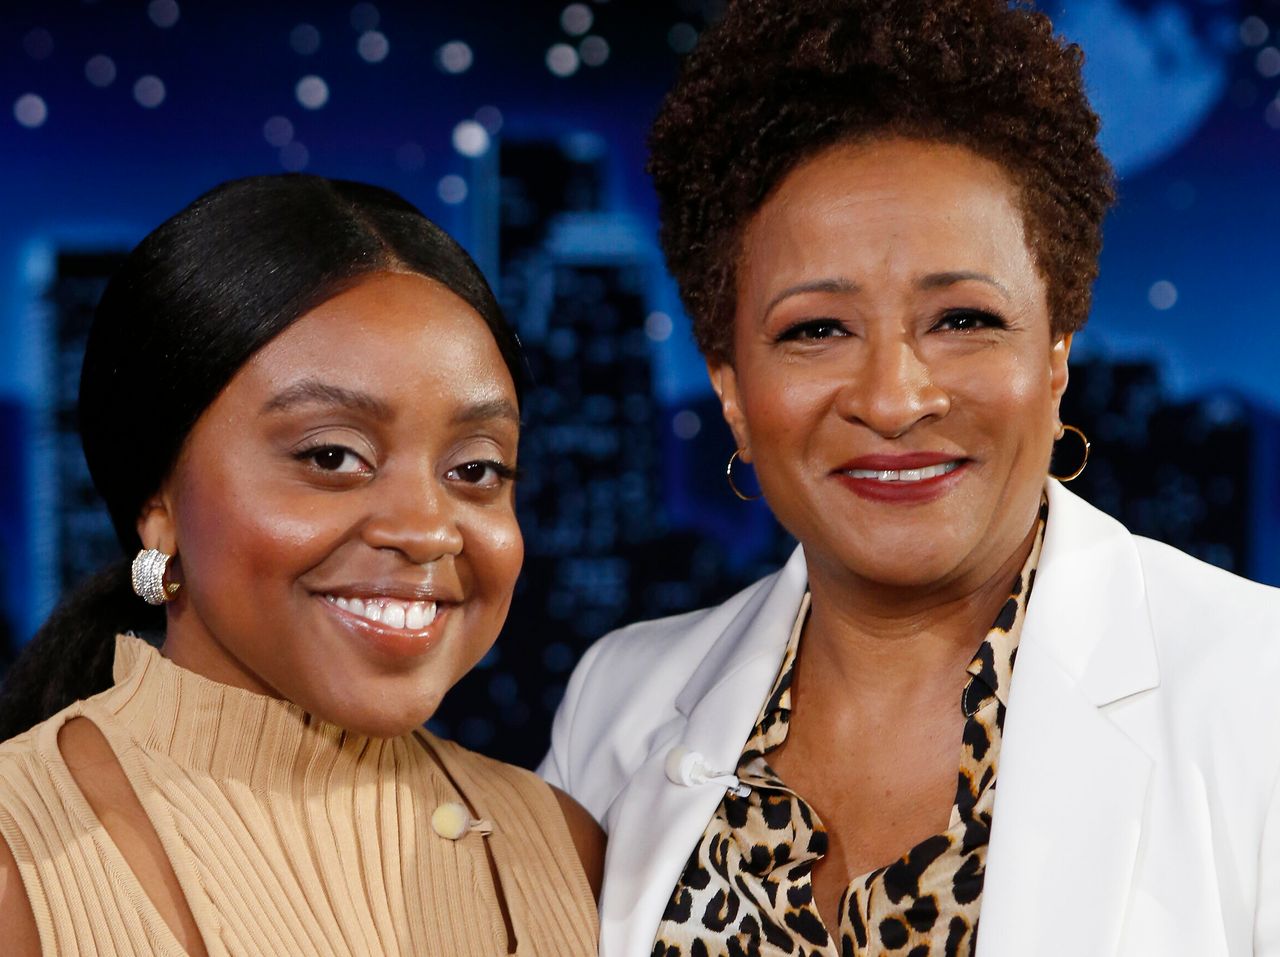 Brunson with Wanda Sykes, when Skyes guest-hosted "Jimmy Kimmel Live!" in 2021.